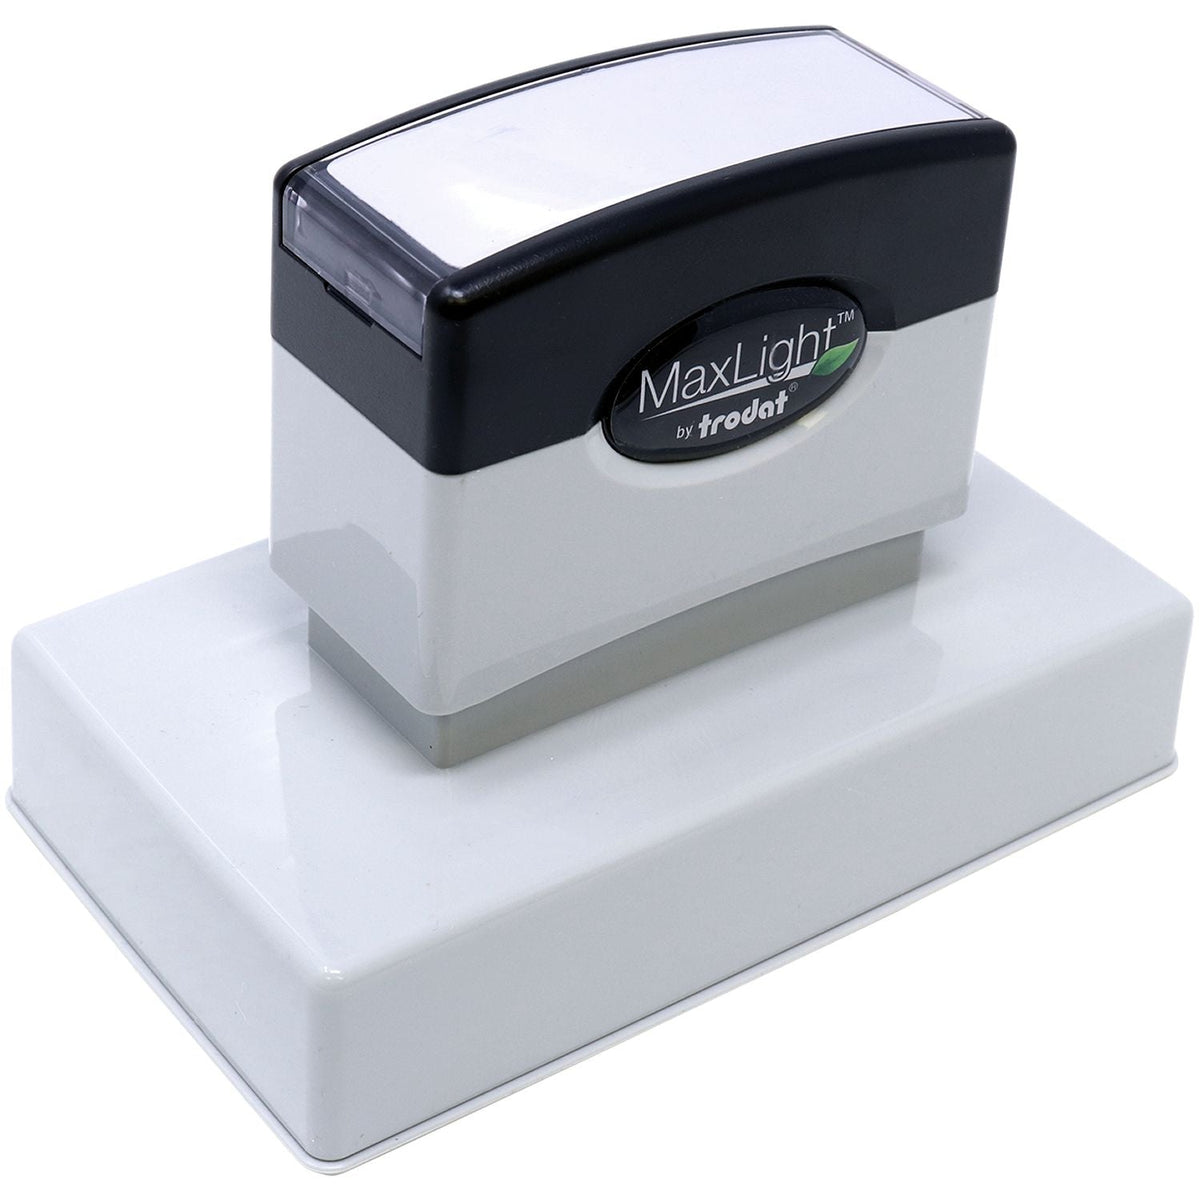 Maxlight Pre Inked Stamp Xl2 750 Top Front Side Angle